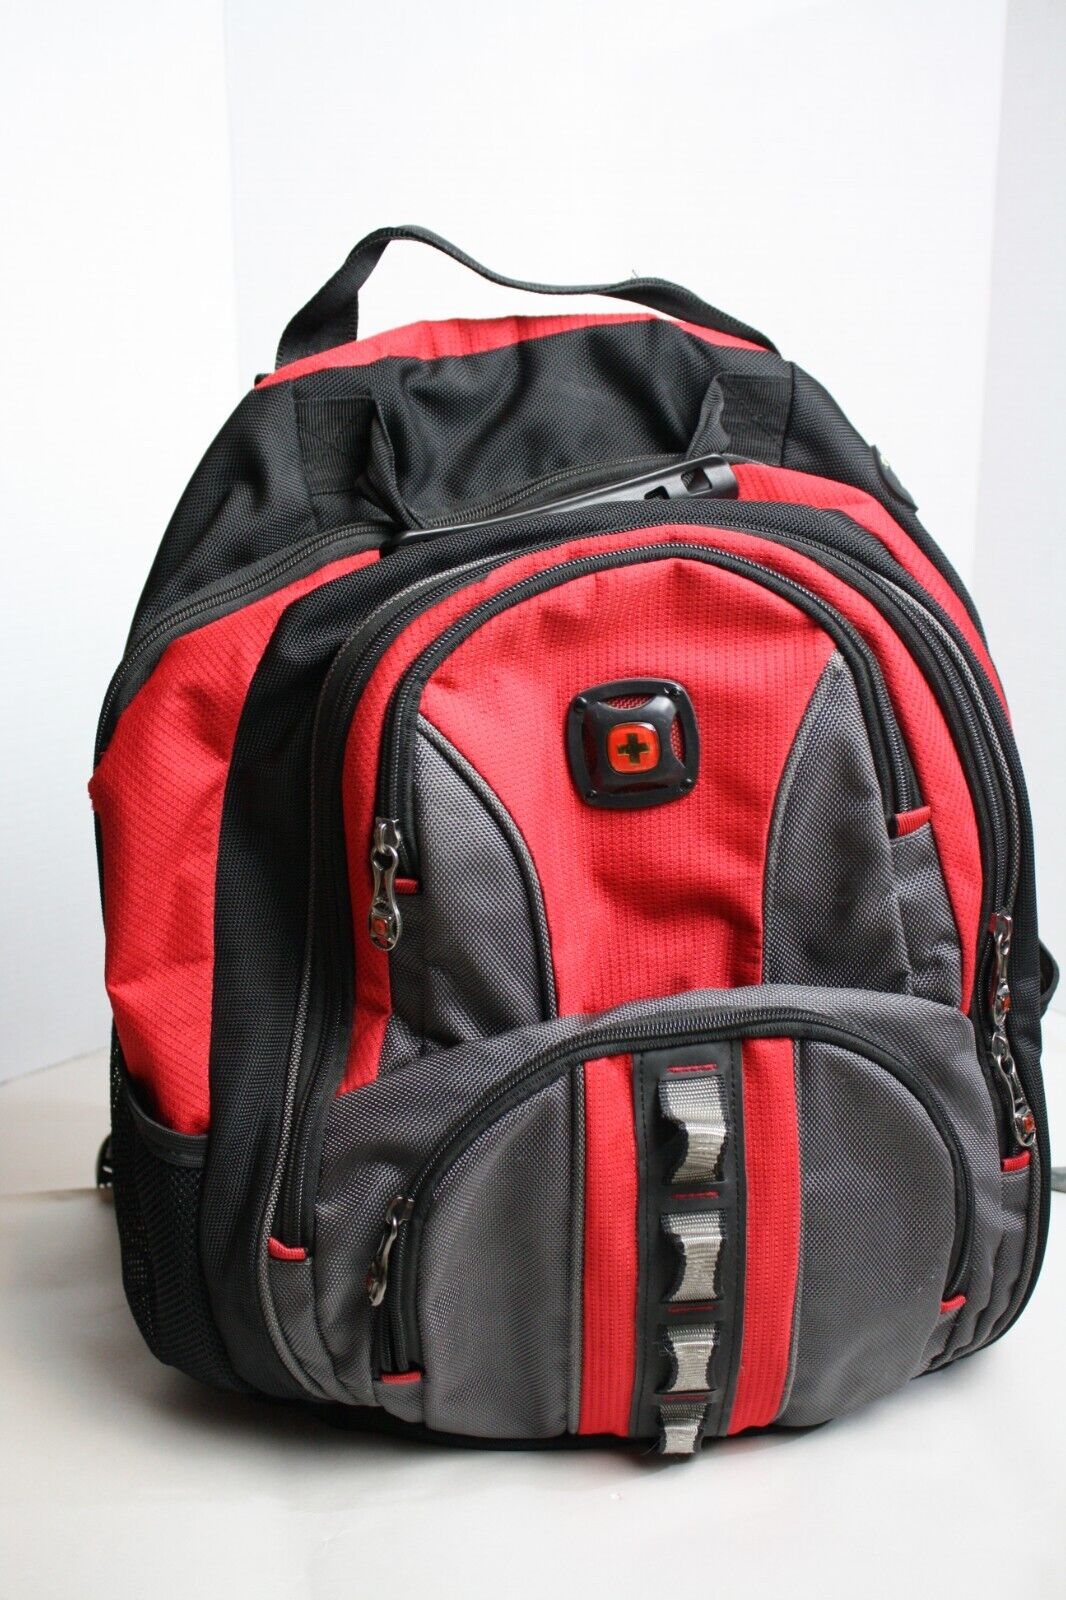 Swiss Gear by Wenger Padded Laptop Backpack - Black/Red